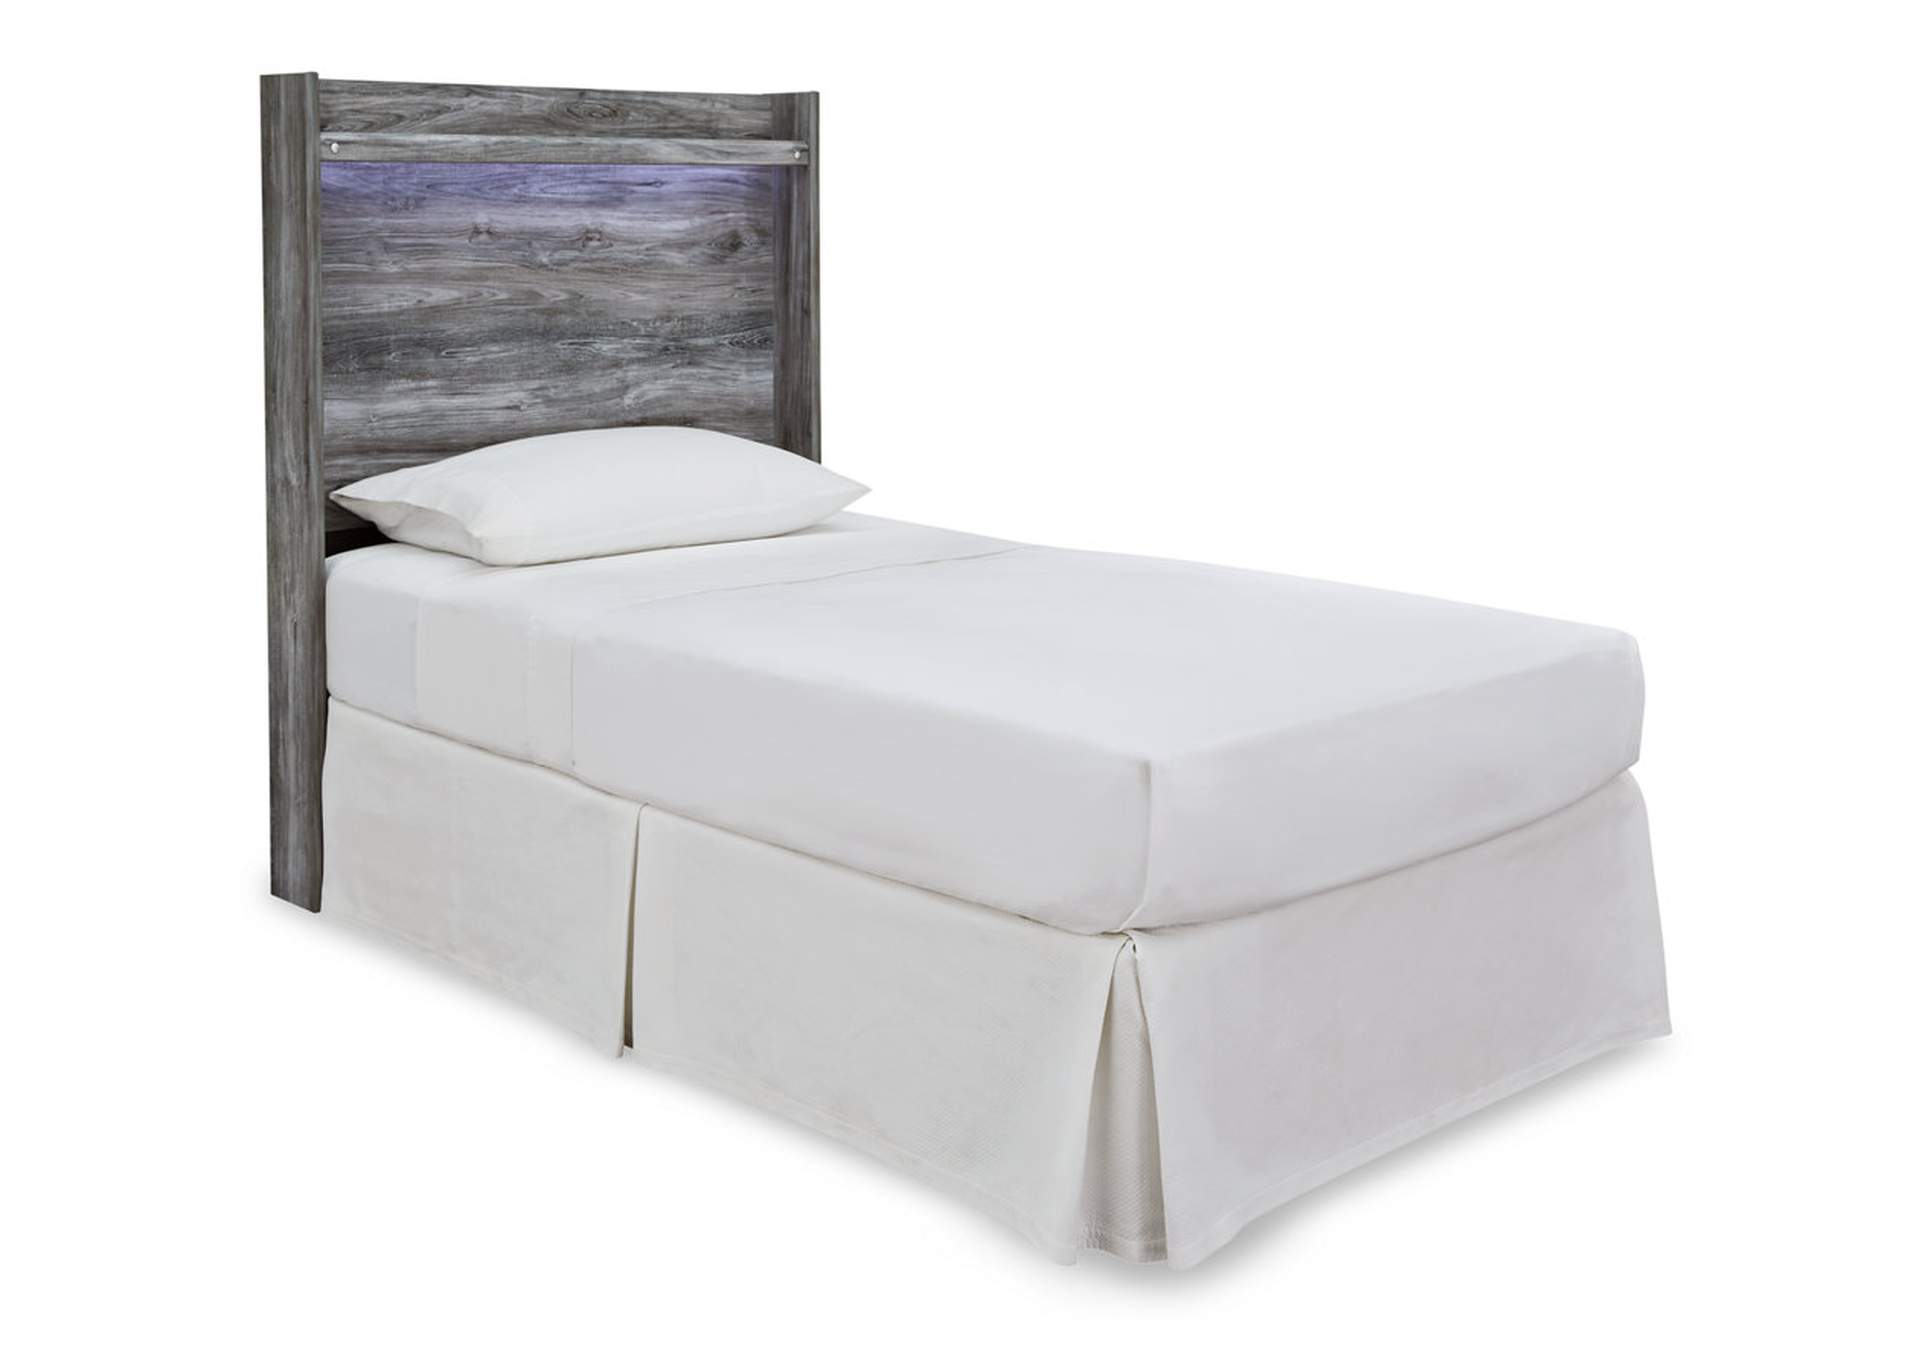 Baystorm Twin Panel Bed Headboard, Dresser, Mirror and Nightstand,Signature Design By Ashley